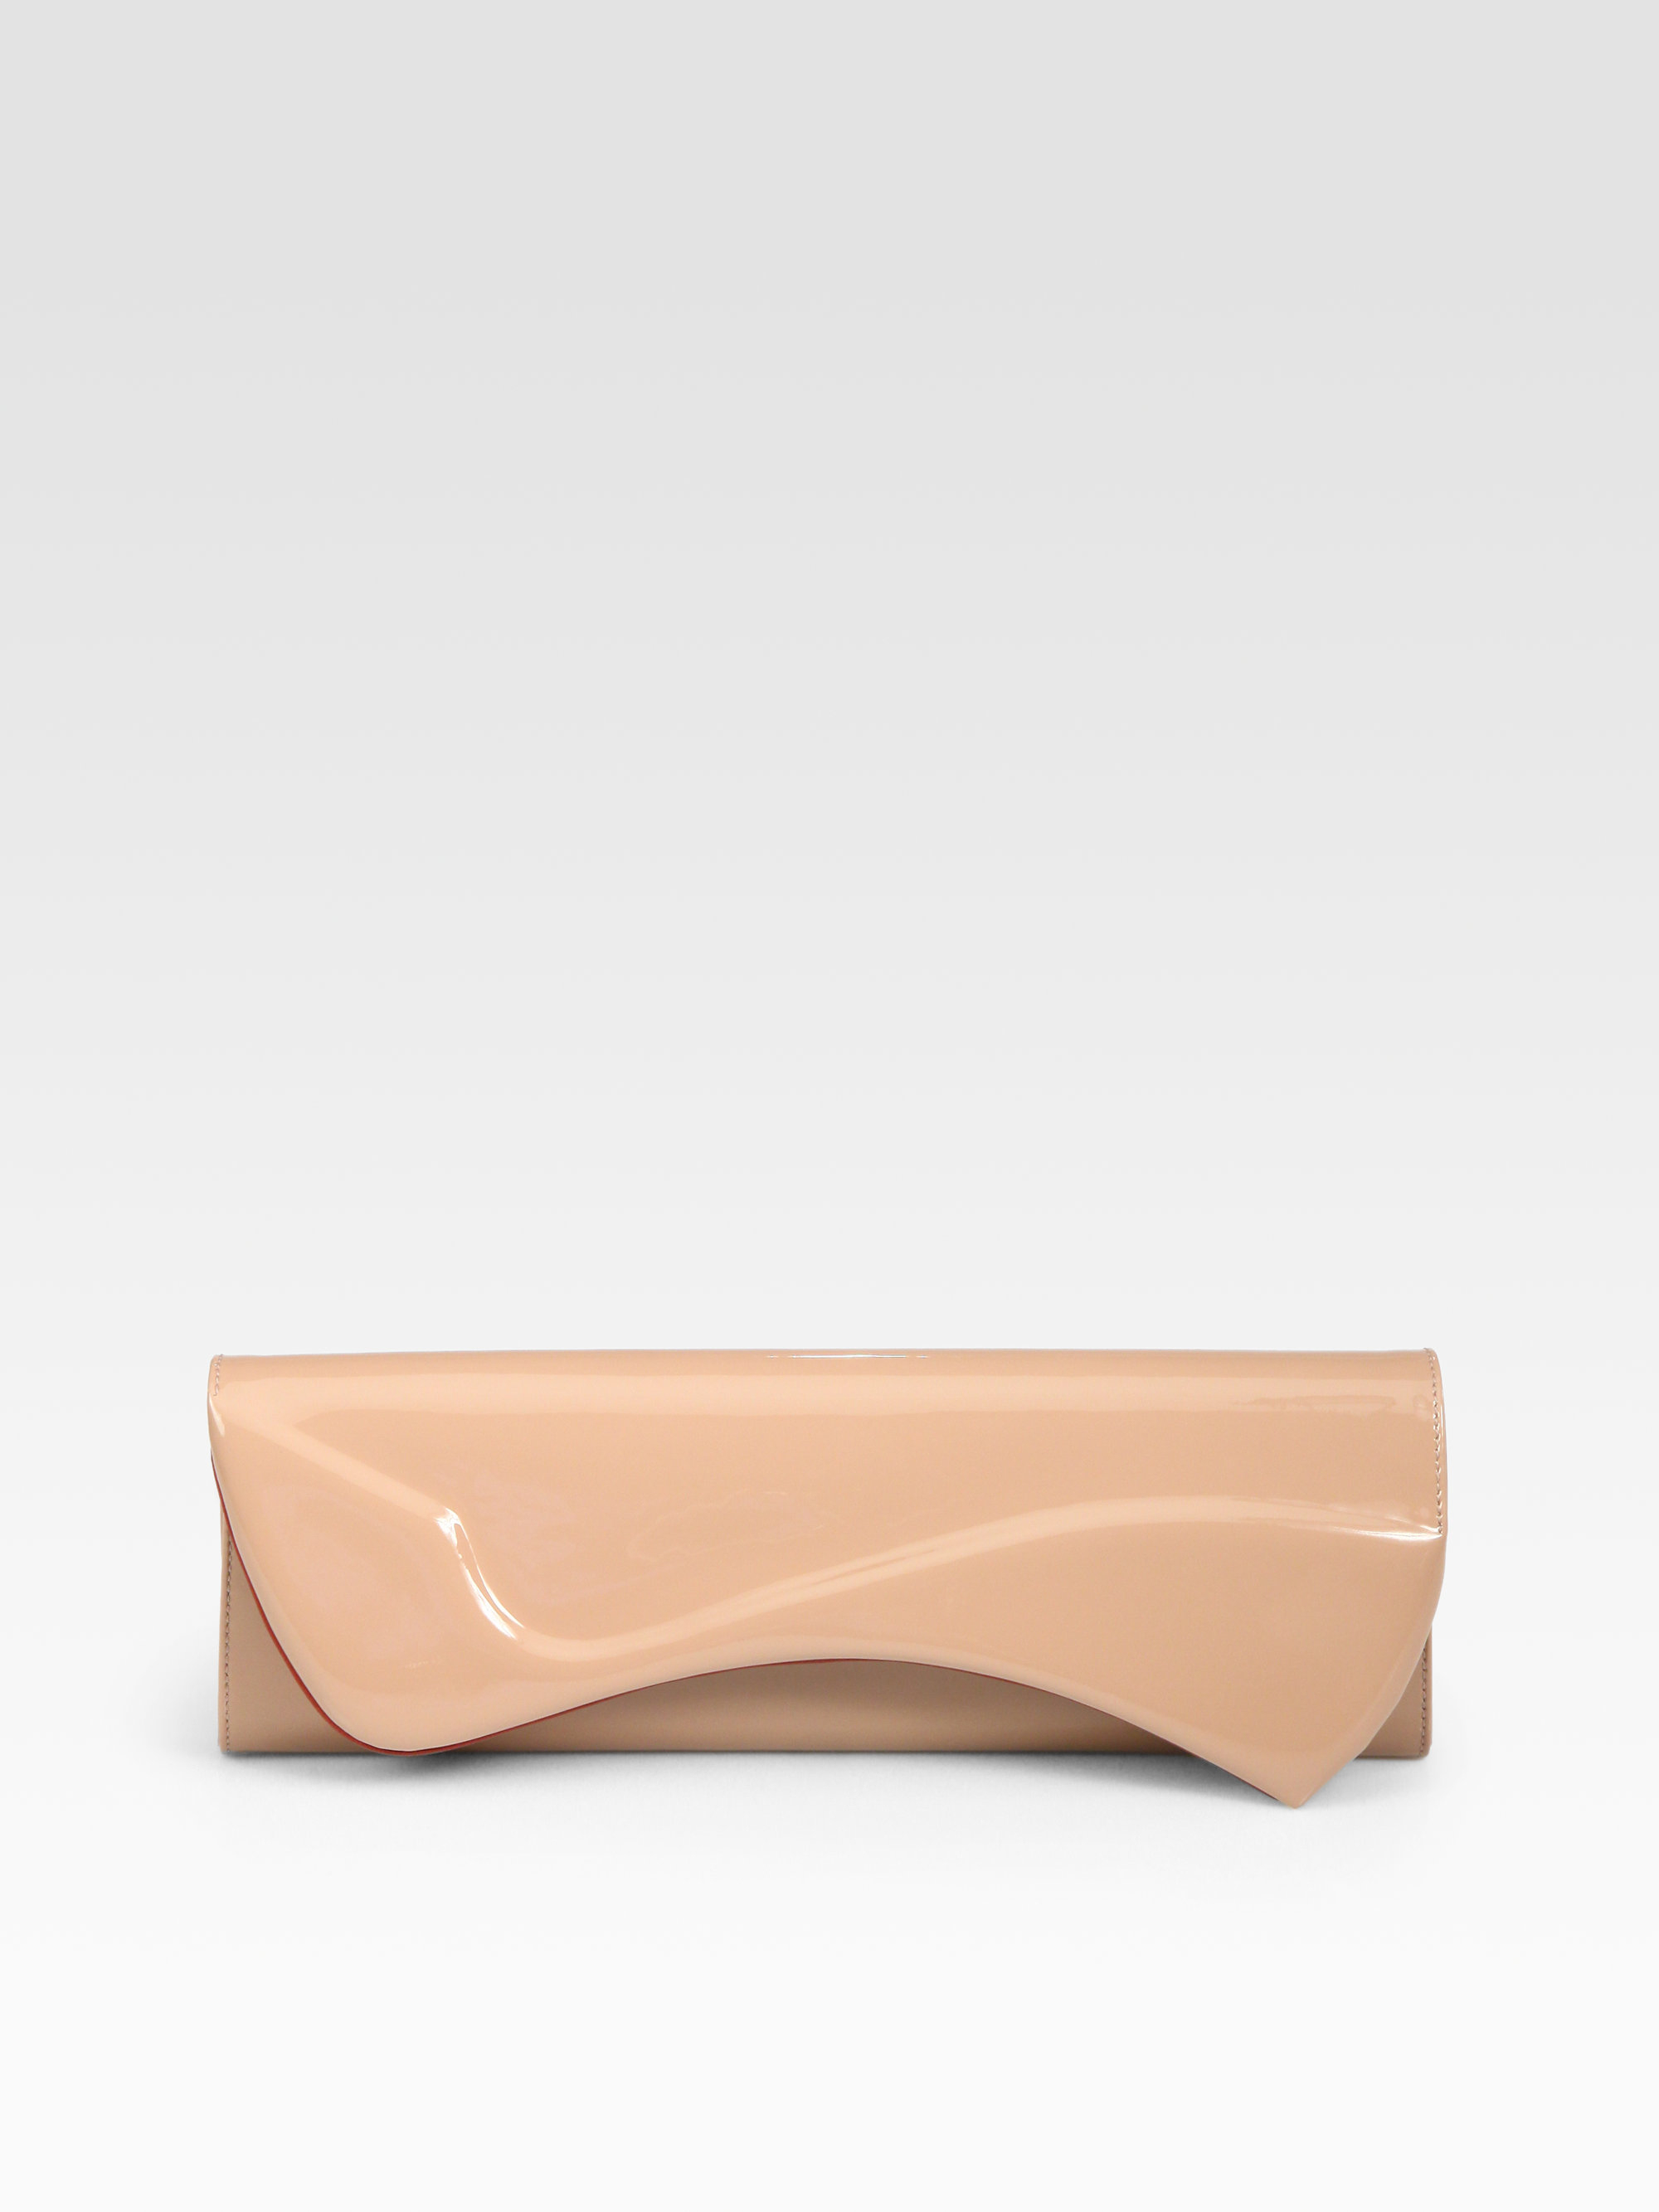 Christian Louboutin Pigalle Patent Leather Clutch in Natural | Lyst